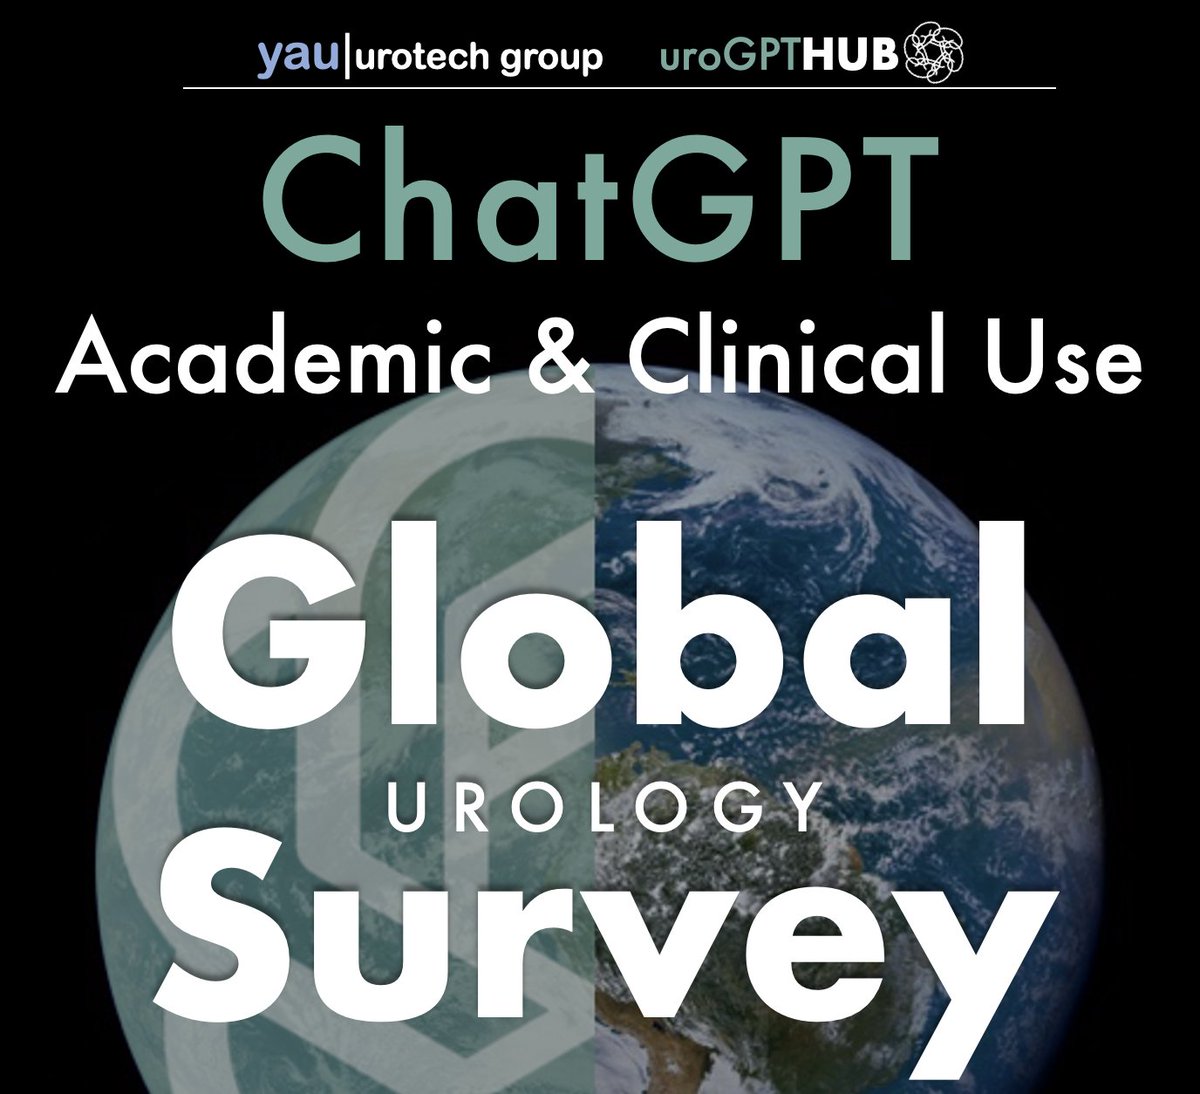 🚨Calling all #urology friends📷! Join us in assessing #ChatGPT's impact on academic📷and clinical settings📷@uroGPT📷 Fill out the survey now: surveymonkey.com/r/CCWVVDR🔗